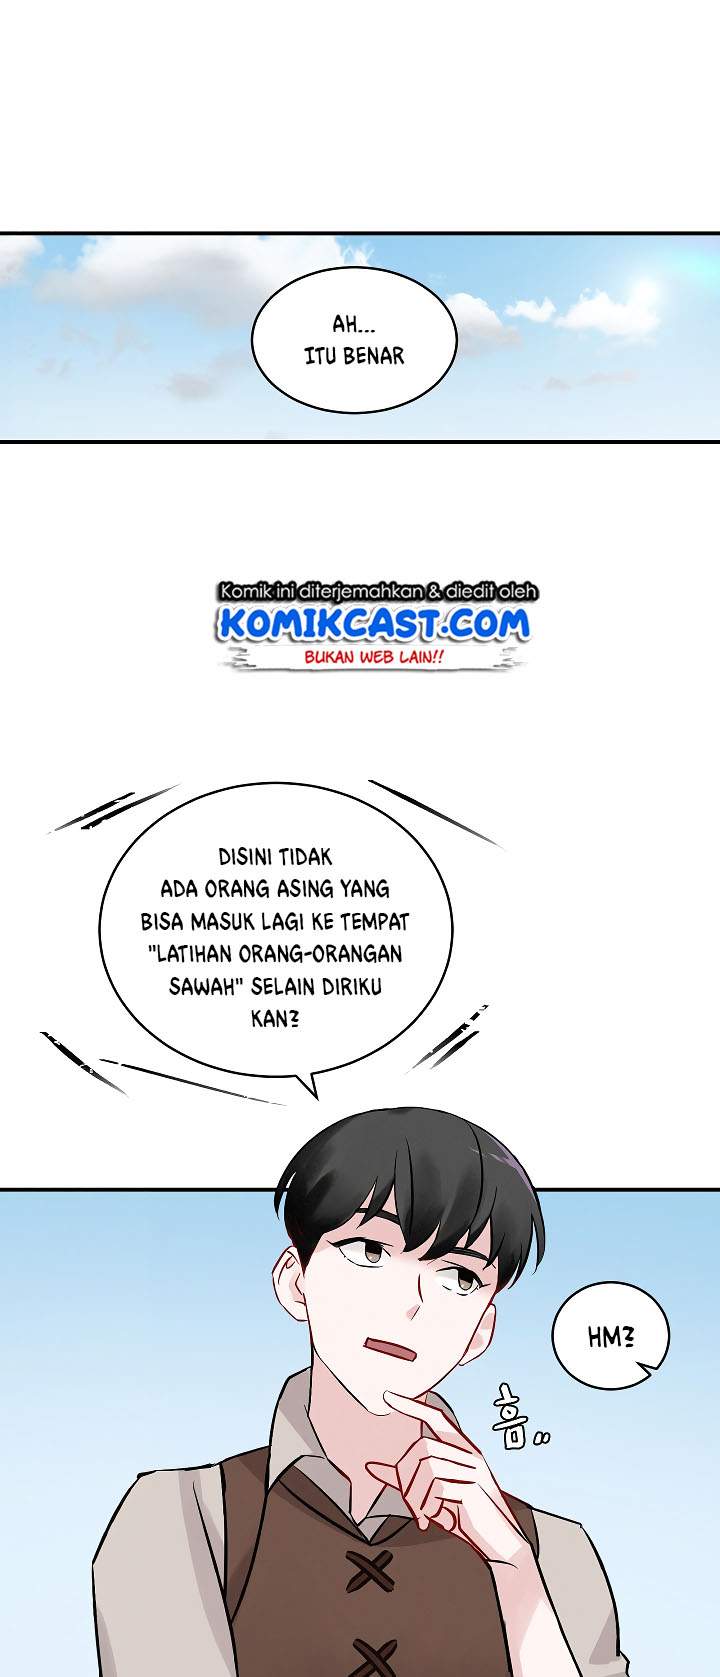 Leveling Up, By Only Eating! (Gourmet Gaming) Chapter 07 - 497